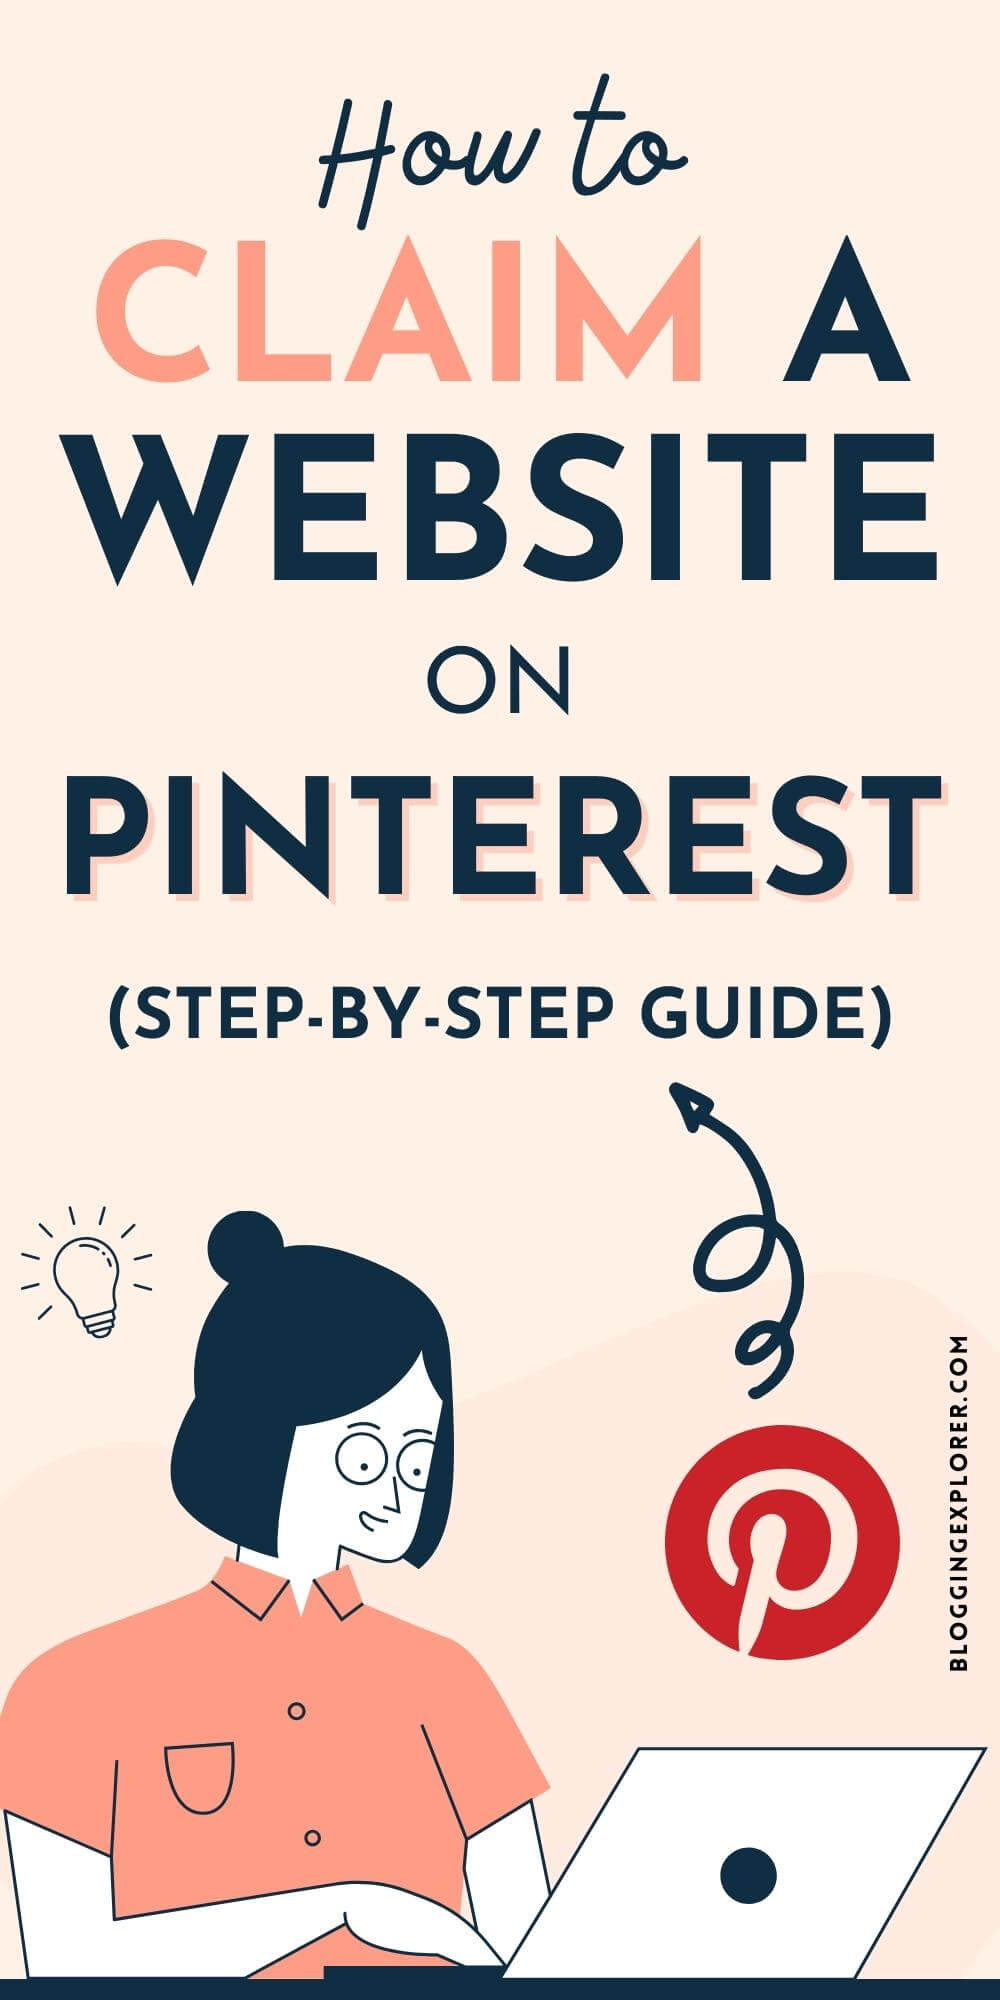 How to claim a website on Pinterest (Step-by-step guide)